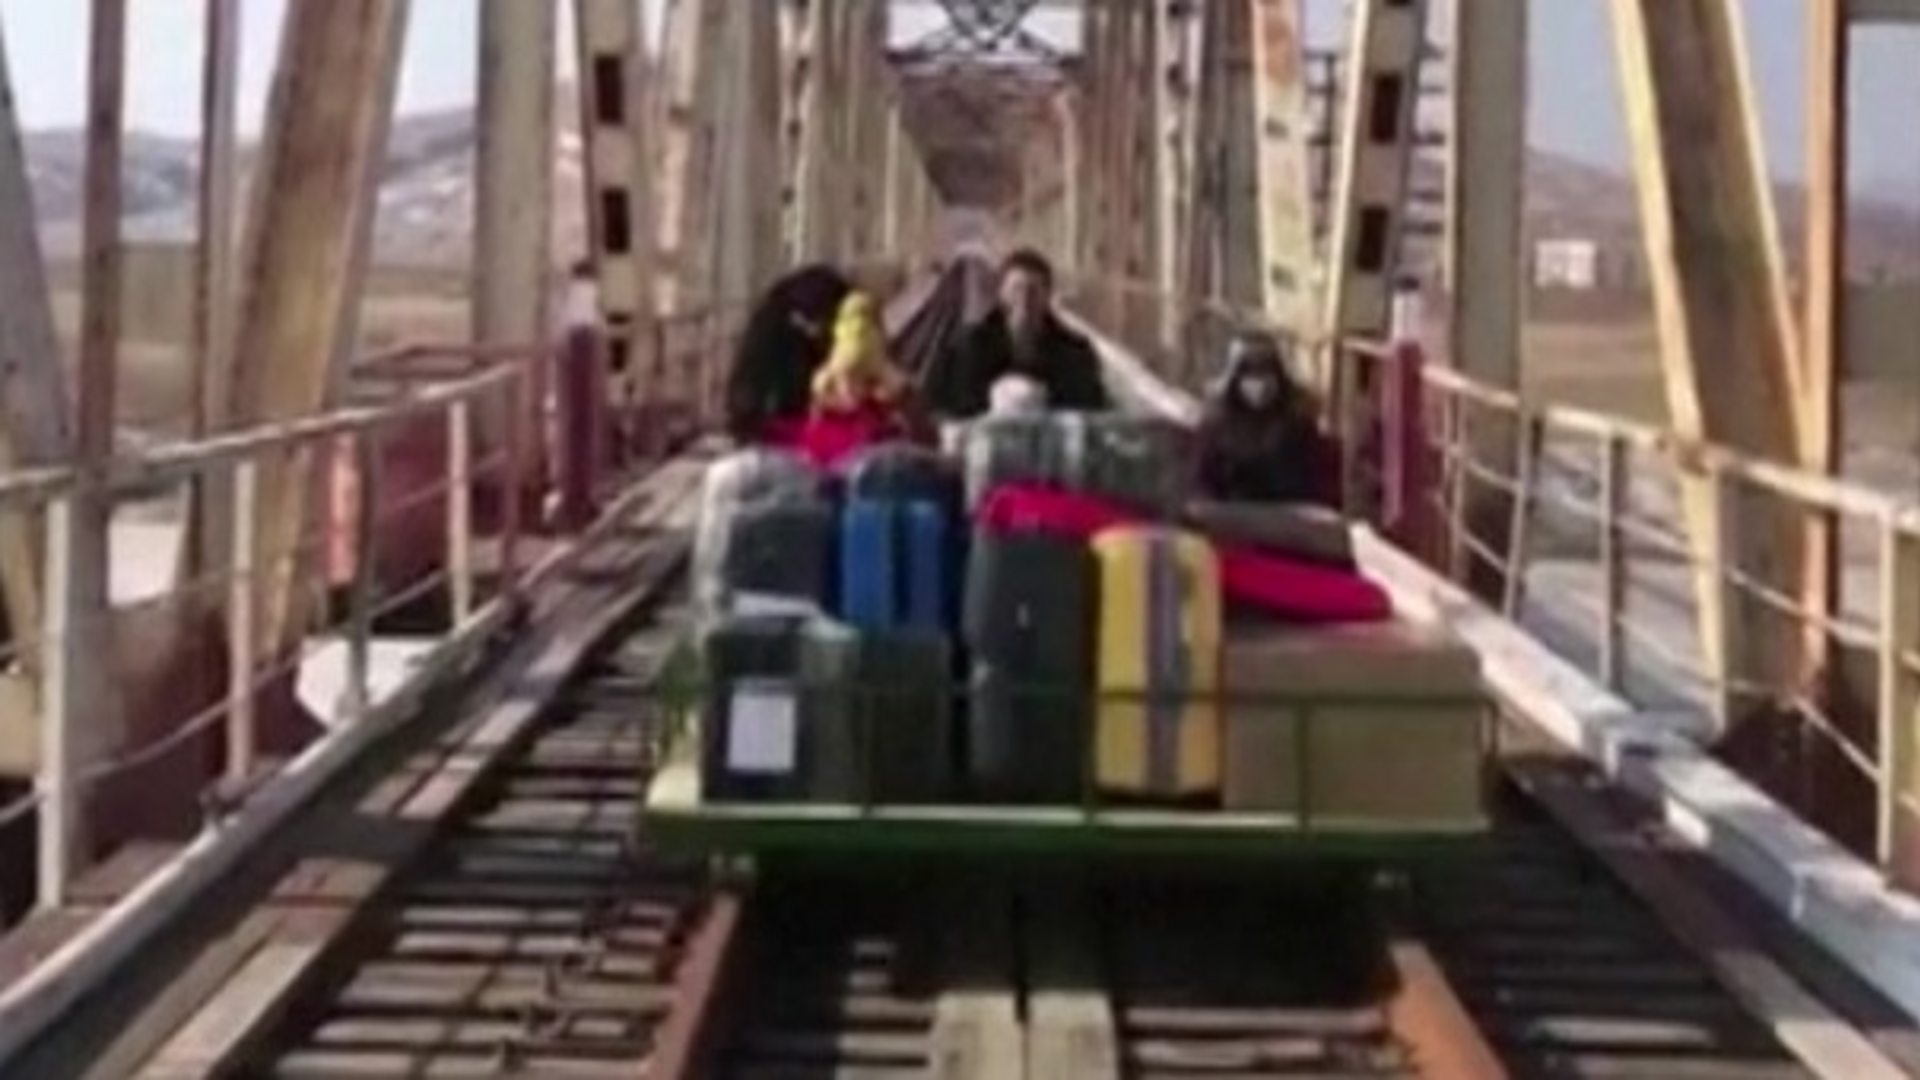 Russians cheer as they exit North Korea on hand-pushed trolley